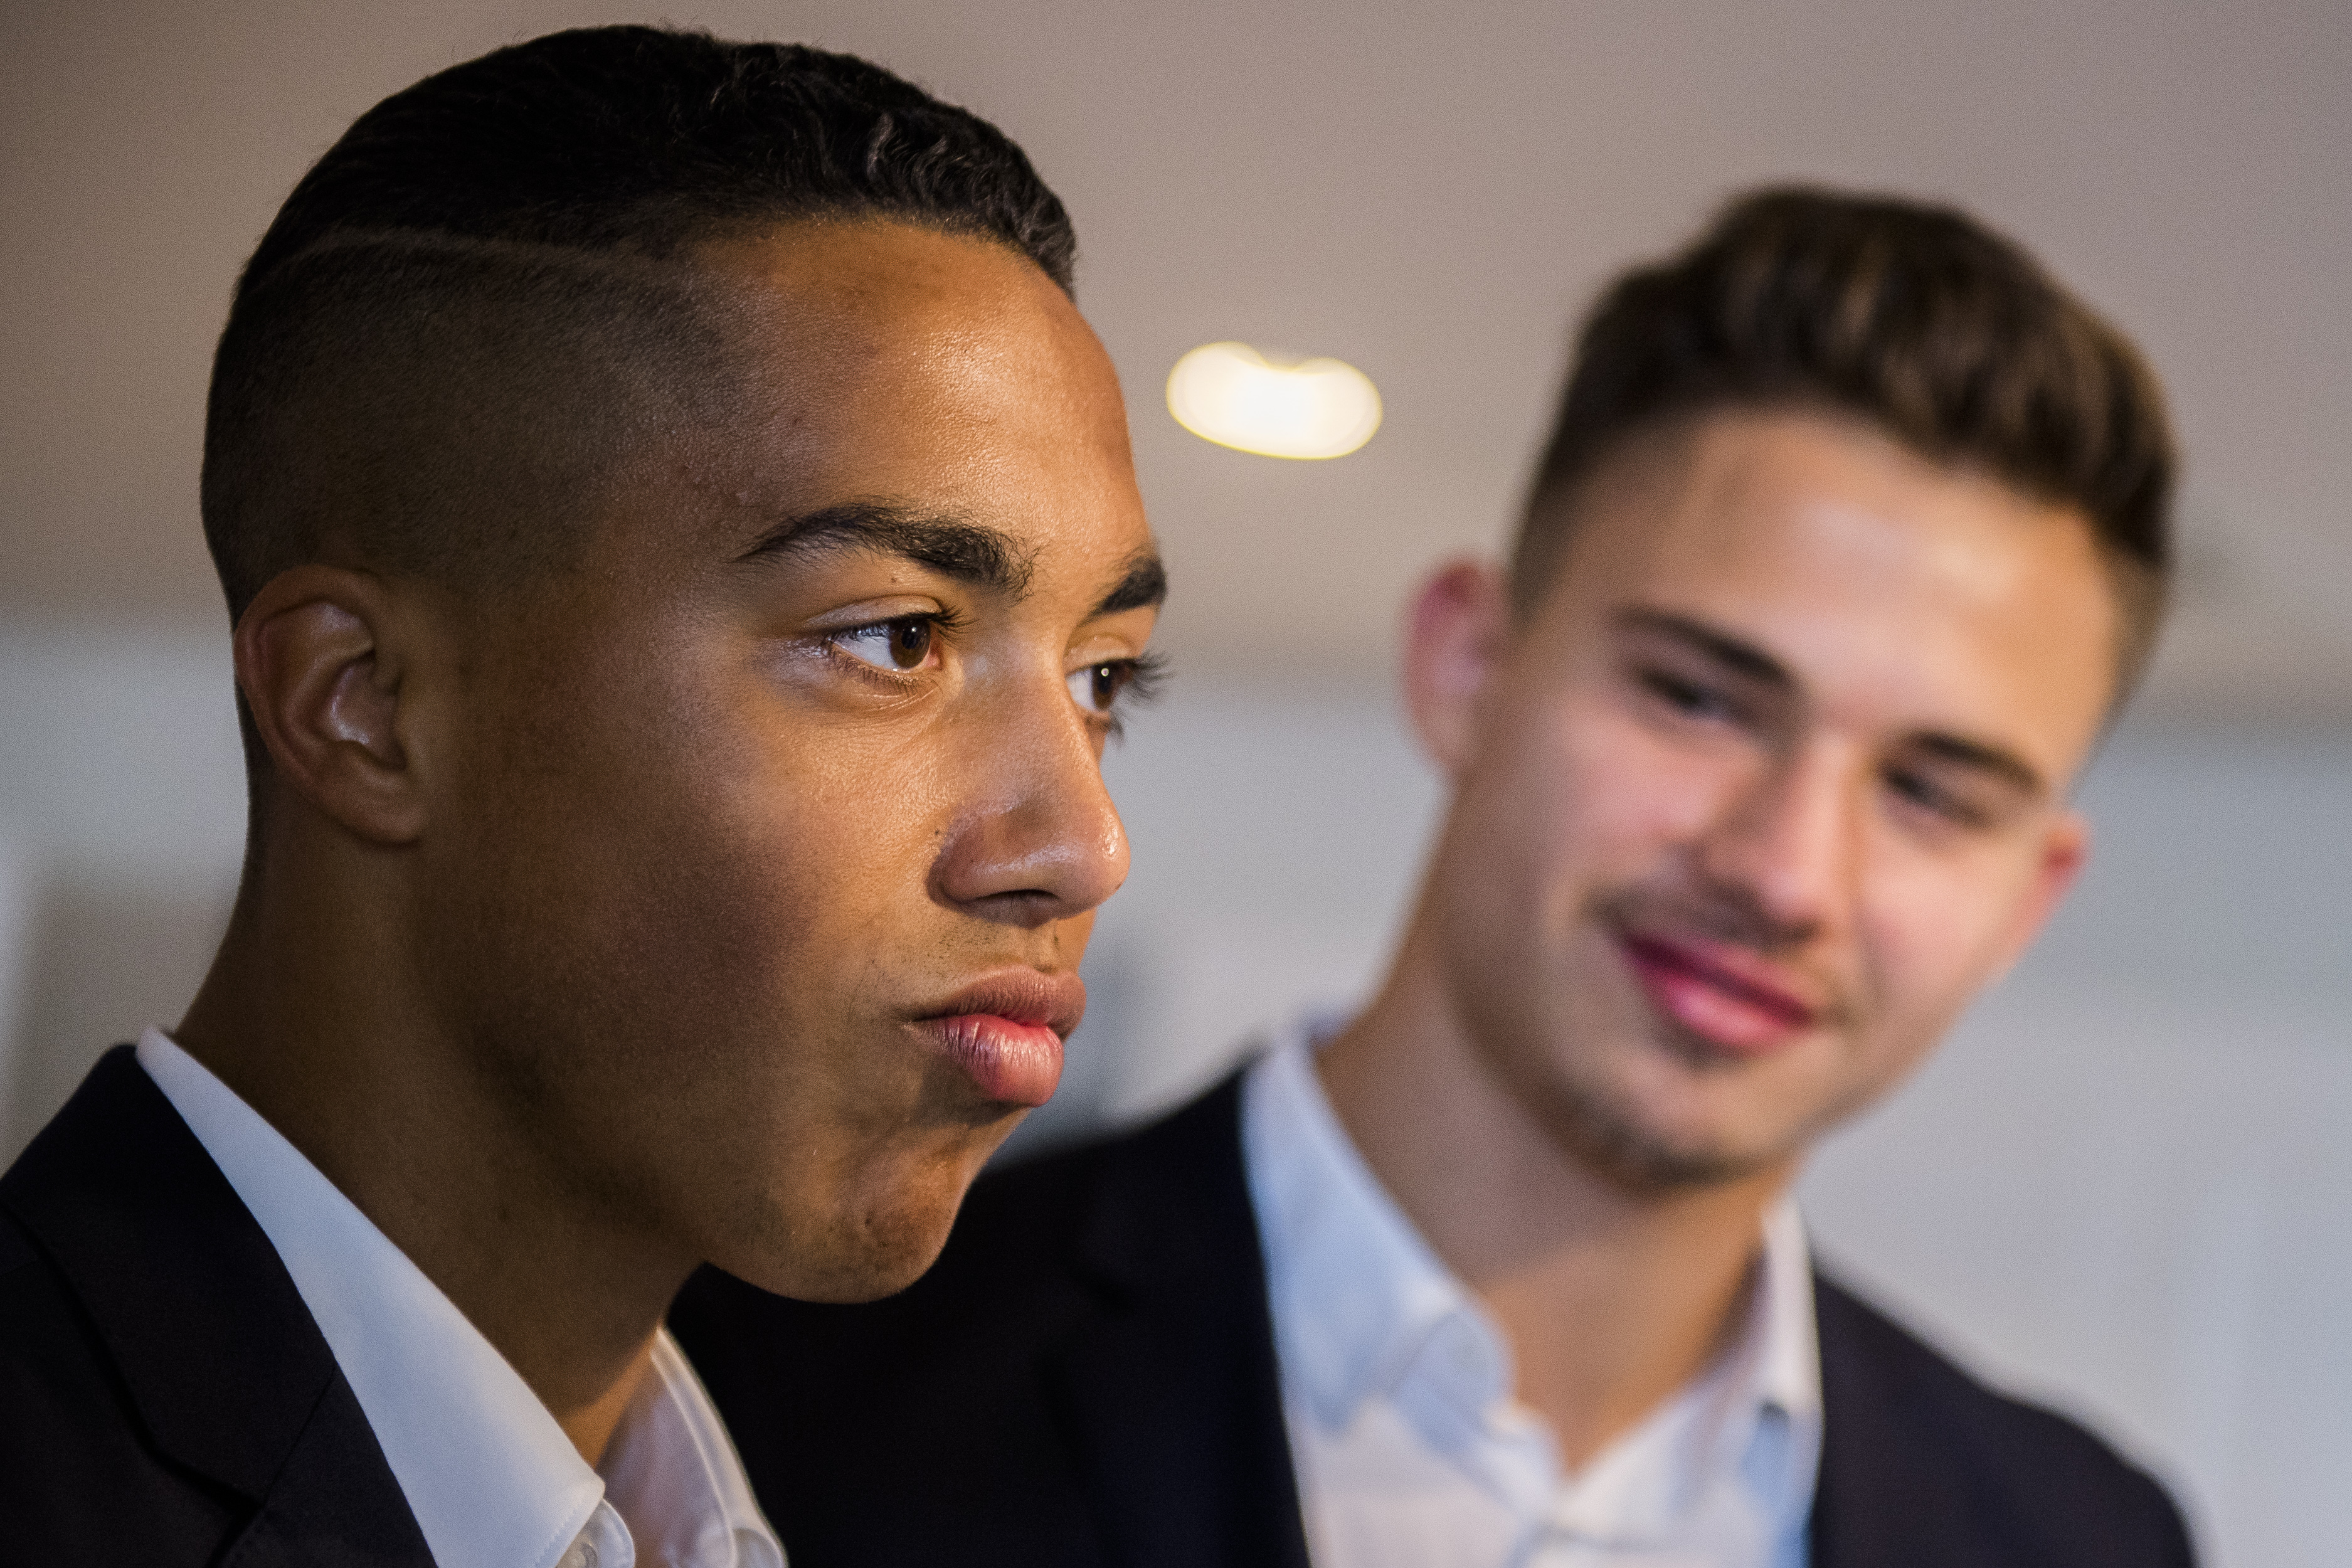 Anderlecht's Youri Tielemans and Anderlecht's Leander Dendoncker talk to the press ahead of a reception of Belgian soccer team RSC Anderlecht to celebrate their 34th title, Monday 22 May 2017 in Brussels. BELGA PHOTO LAURIE DIEFFEMBACQ